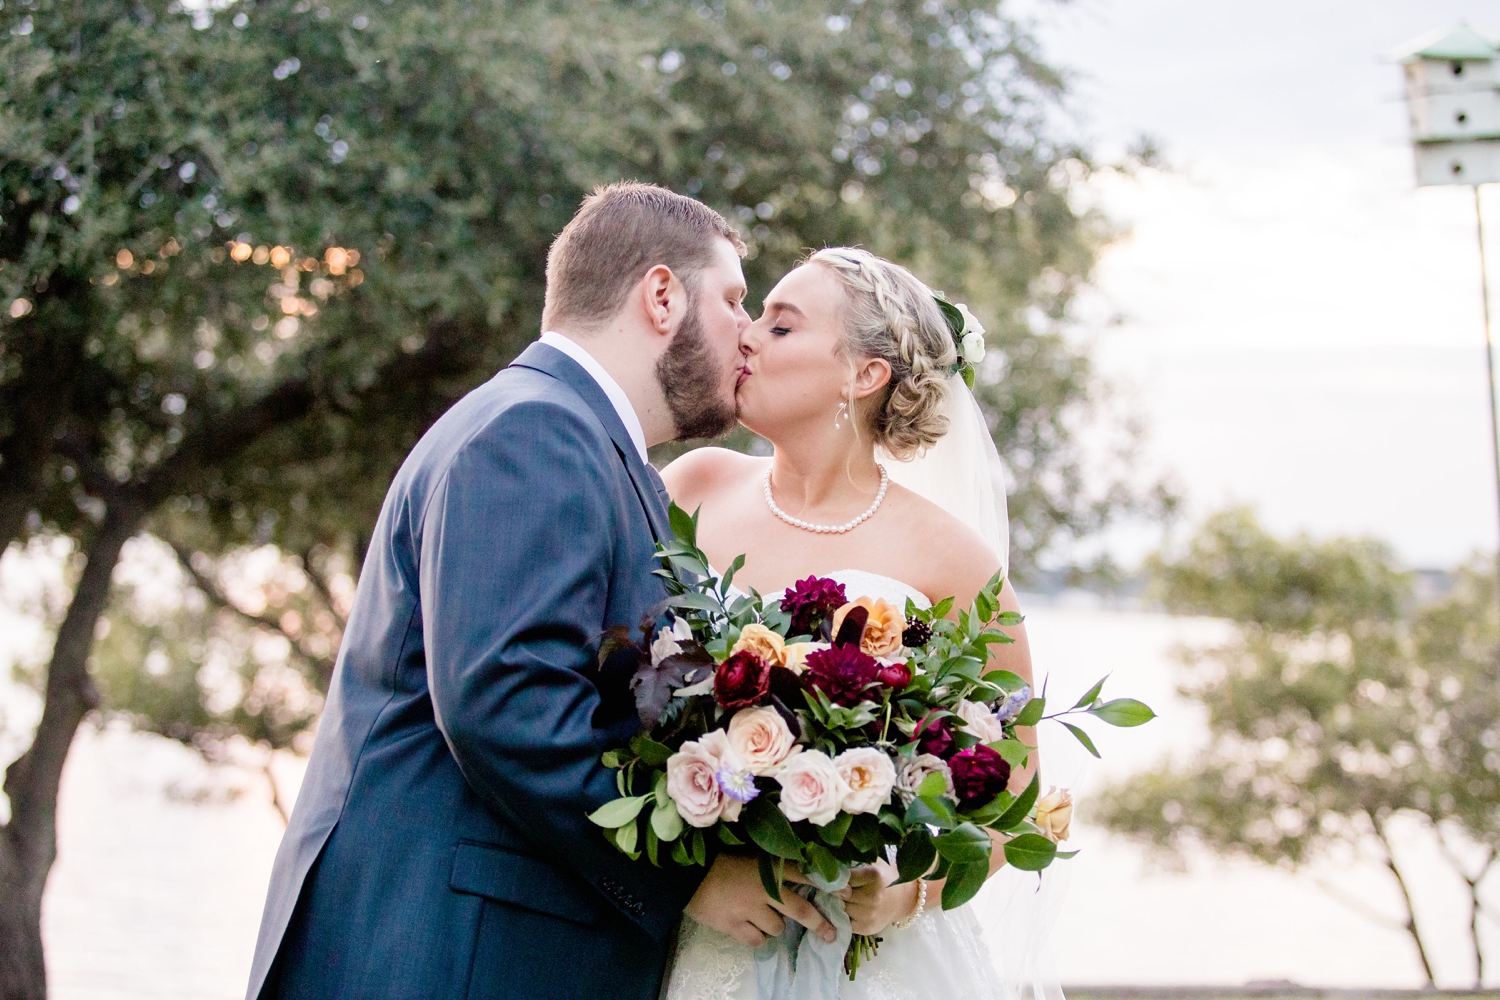 Wedding Photos by the Lake at Sunset in Fort Worth